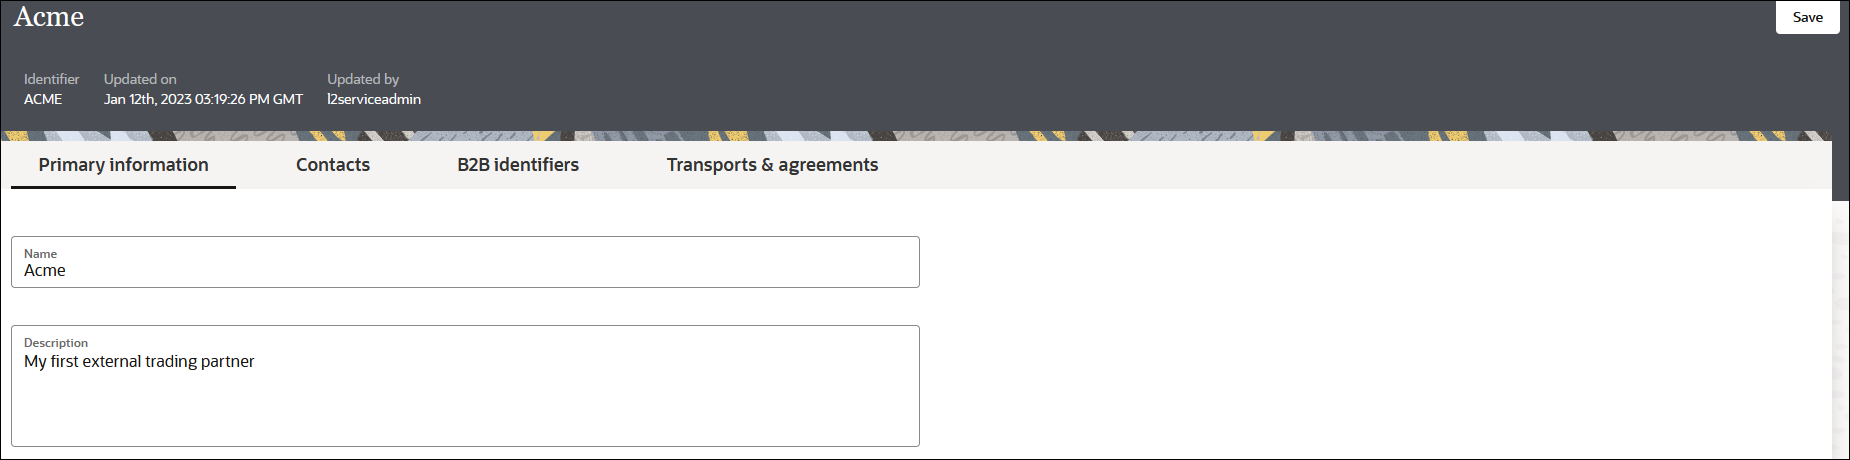 The Primary Information, Contacts, B2B Identifiers, and Transports & Agreements tabs appear at the top. Below are the Name and Description fields. In the upper right is the Save button.